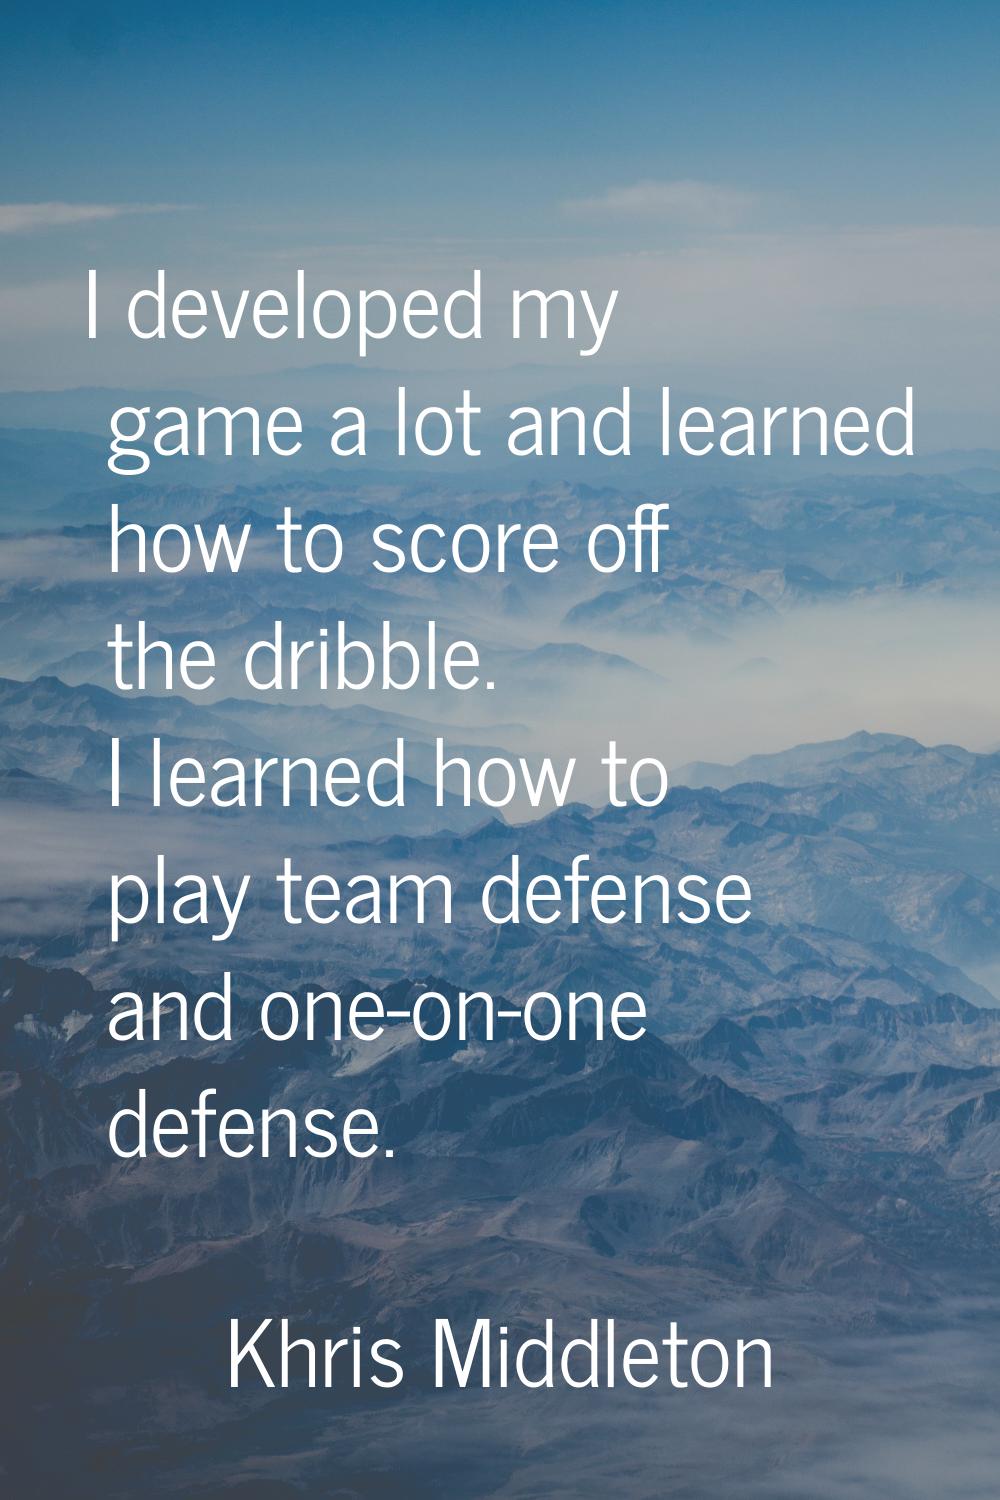 I developed my game a lot and learned how to score off the dribble. I learned how to play team defe